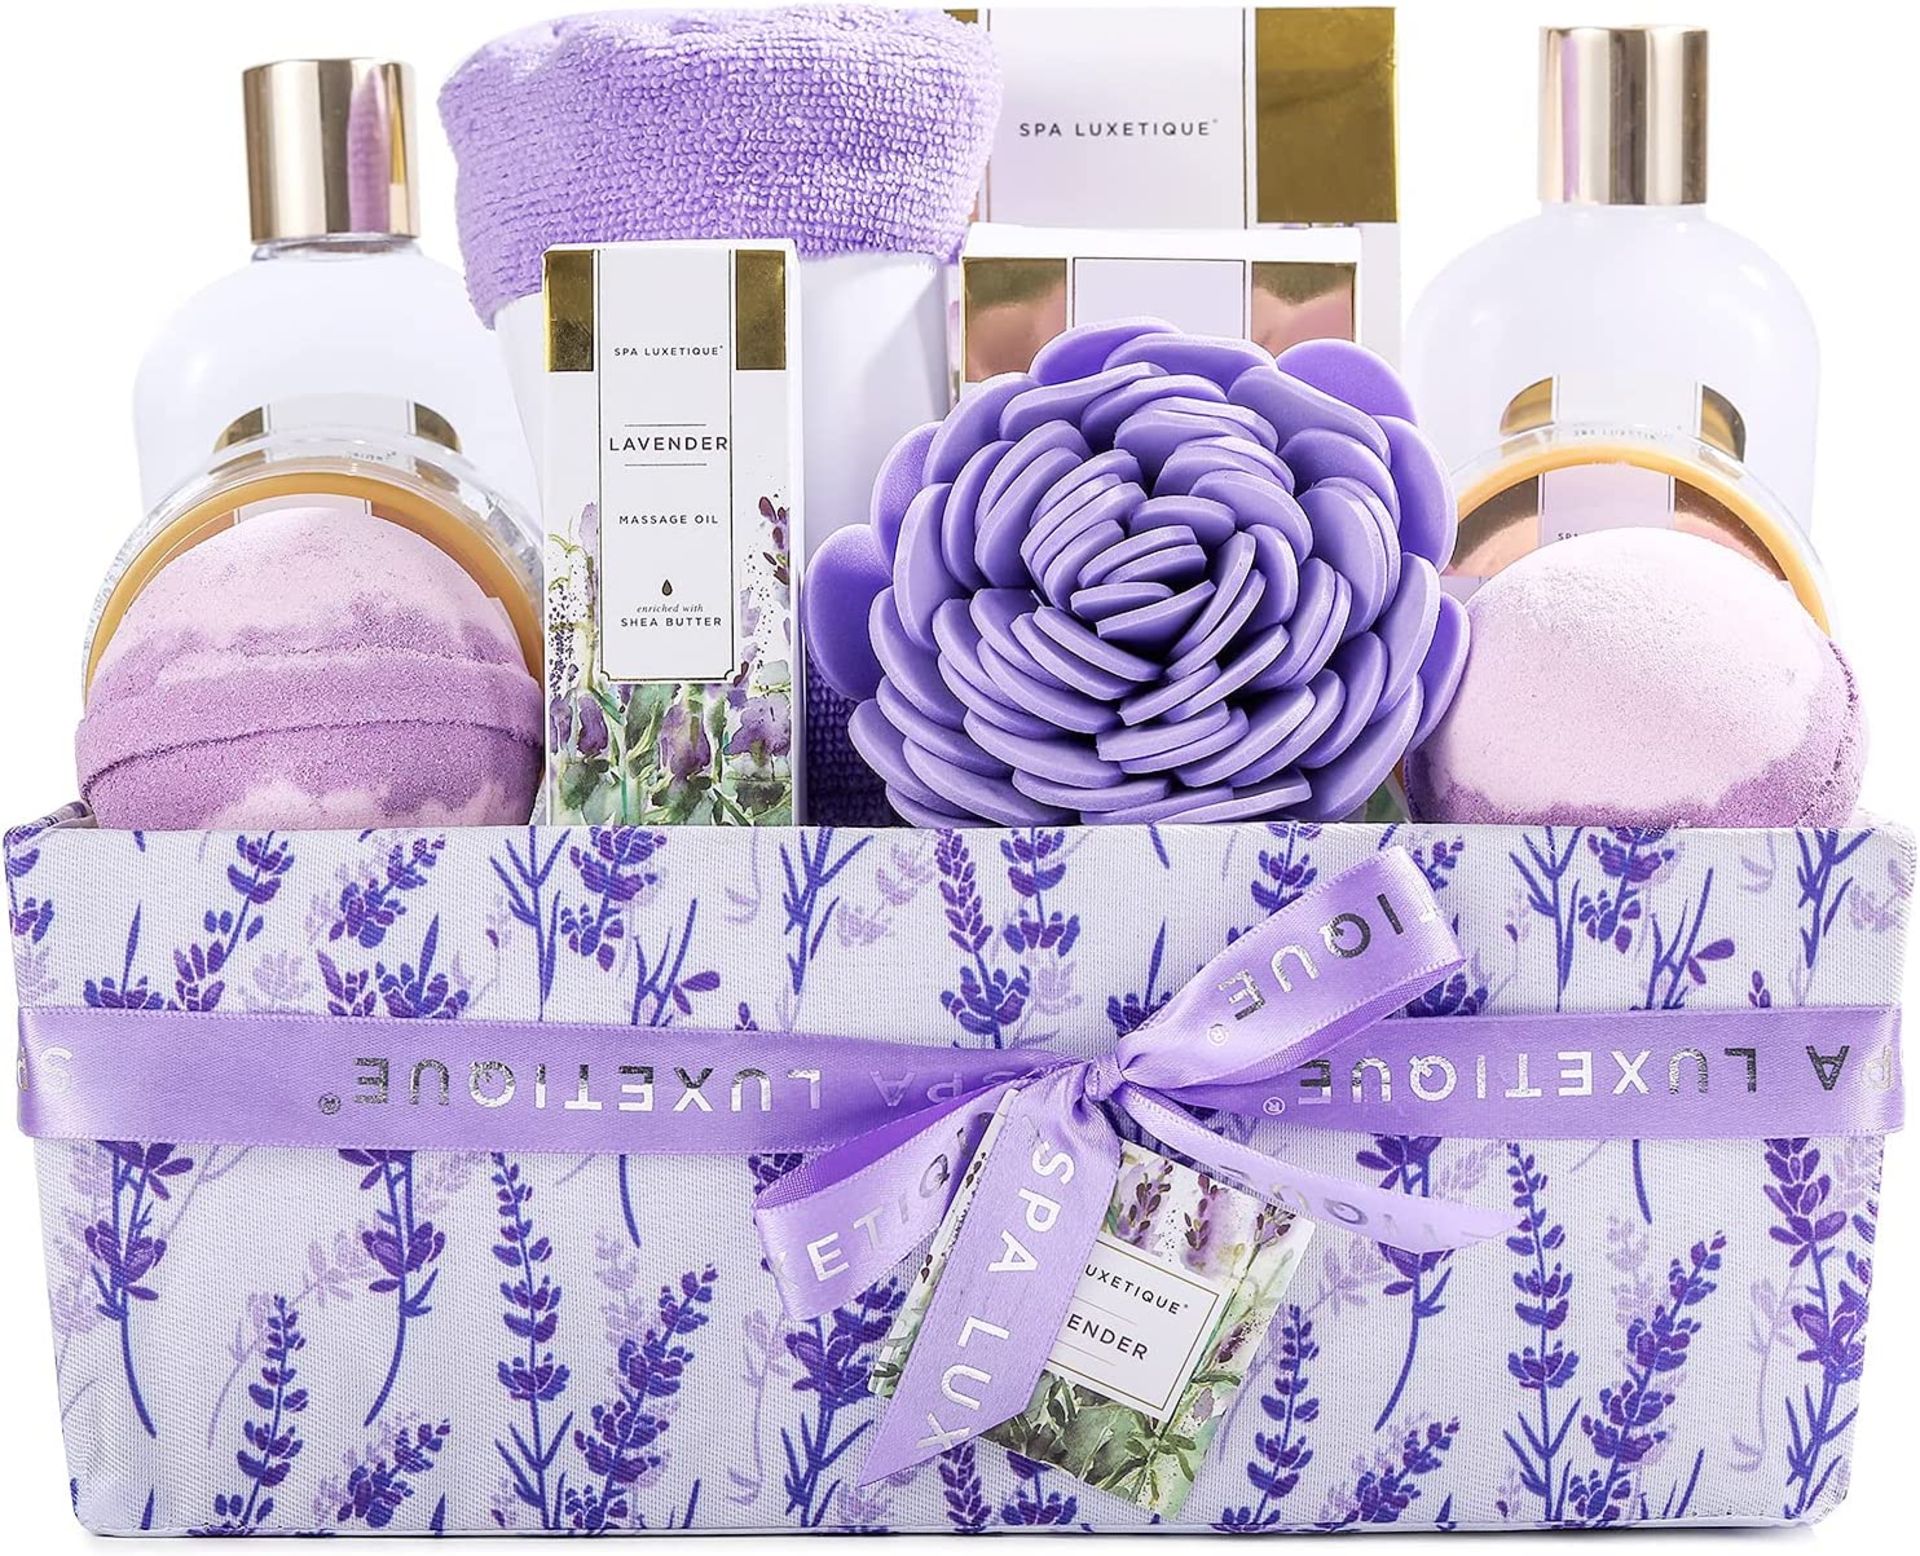 PALLET TO CONTAIN 48 X NEW PACKAGED 12 Piece Lavender Bath Shower Gift Basket. (SKU:SPA-3-LAV).